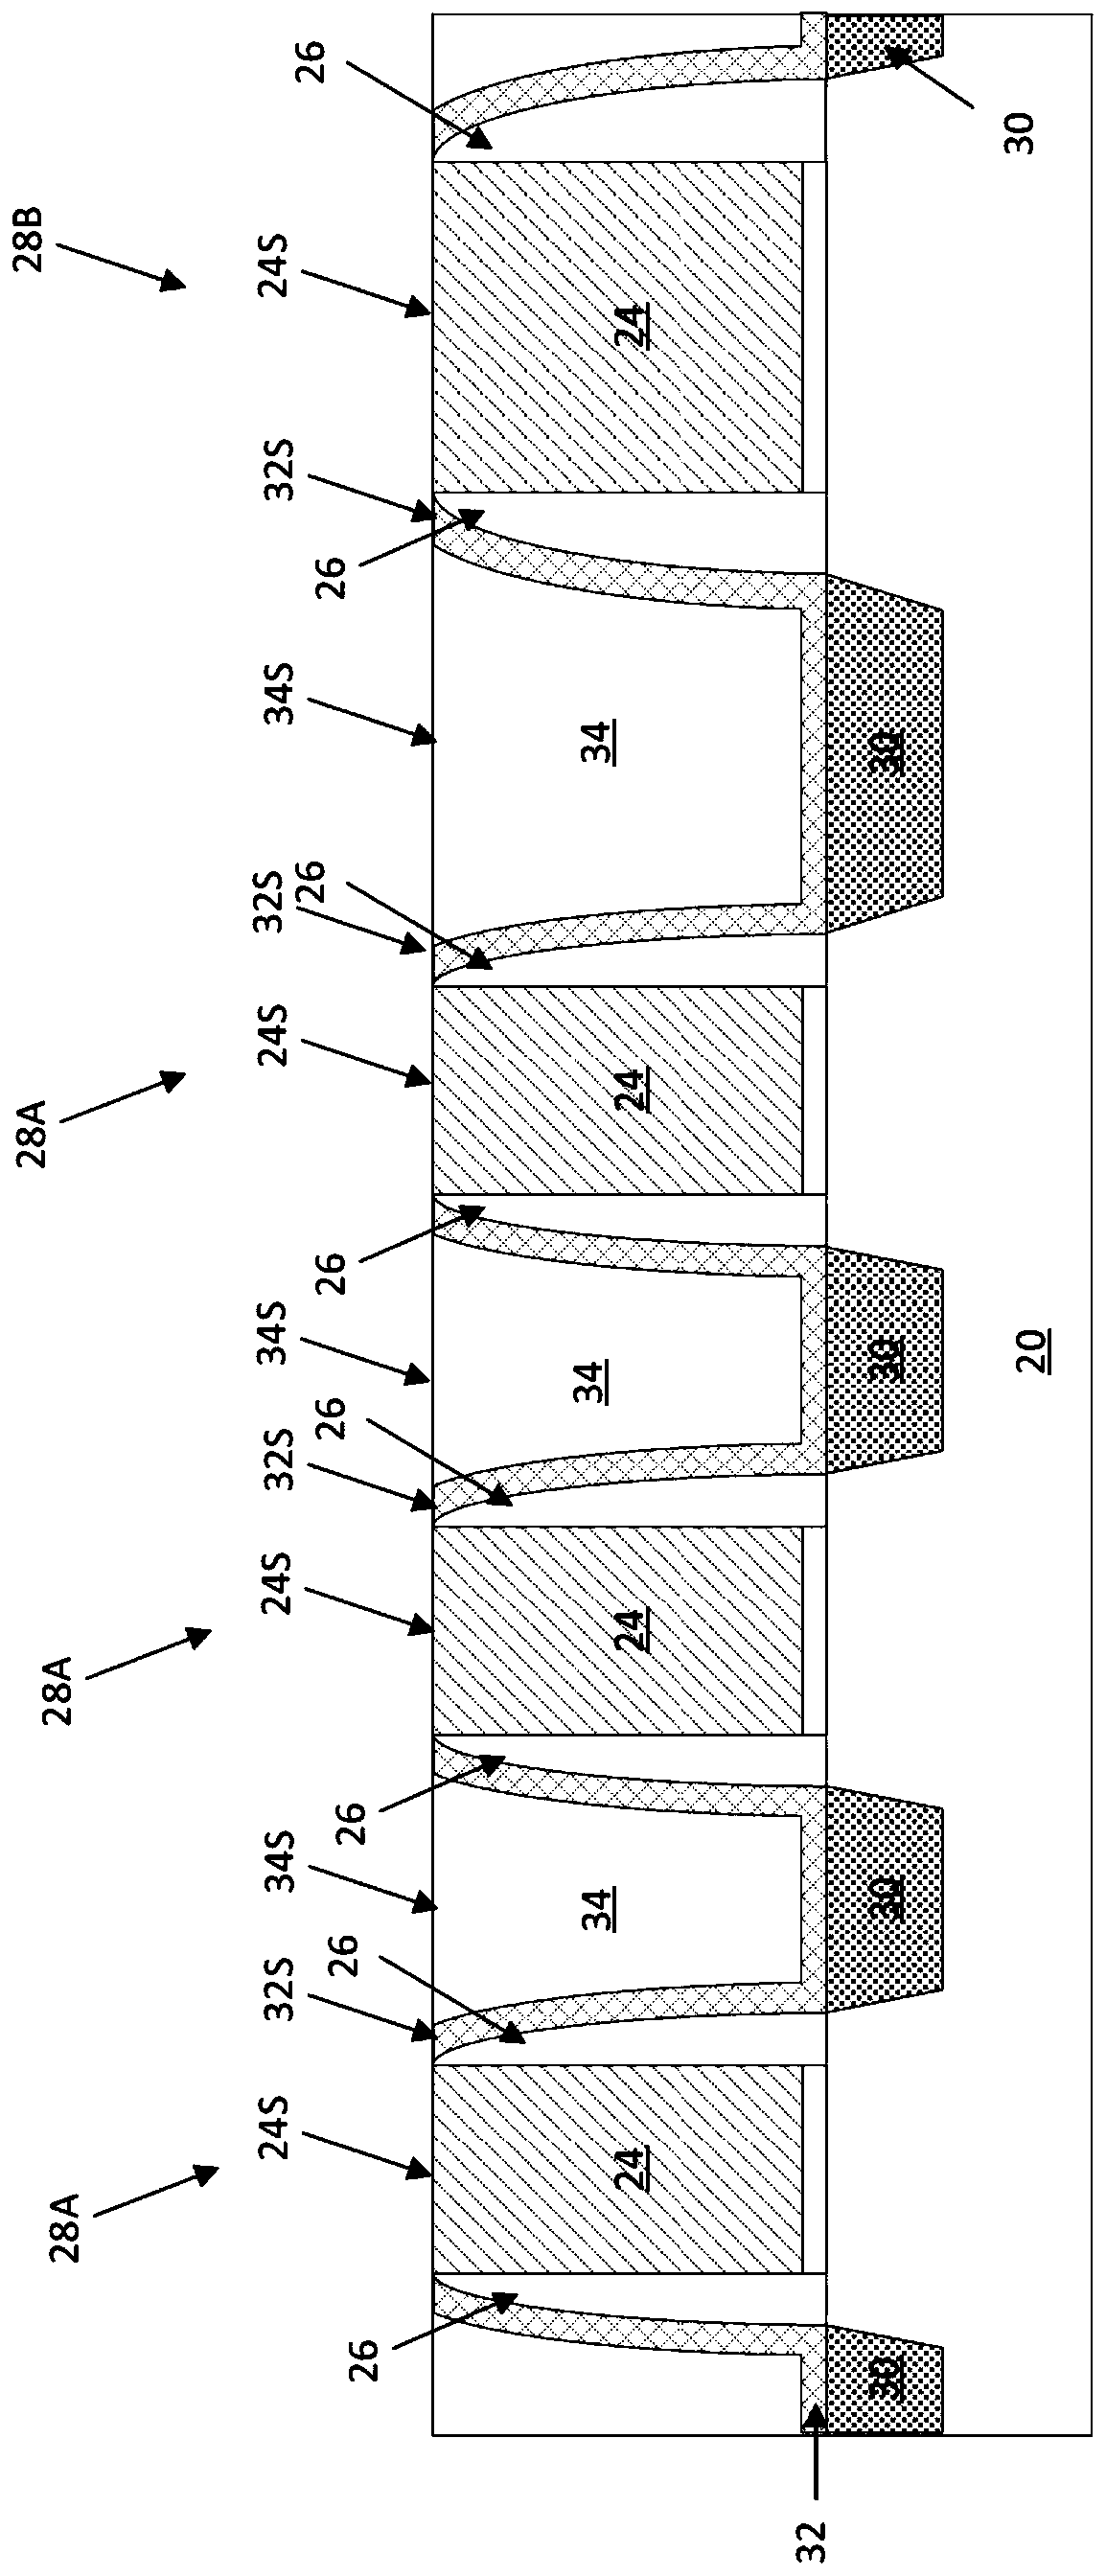 Self-aligned contact scheme, semiconductor structure and method of forming same